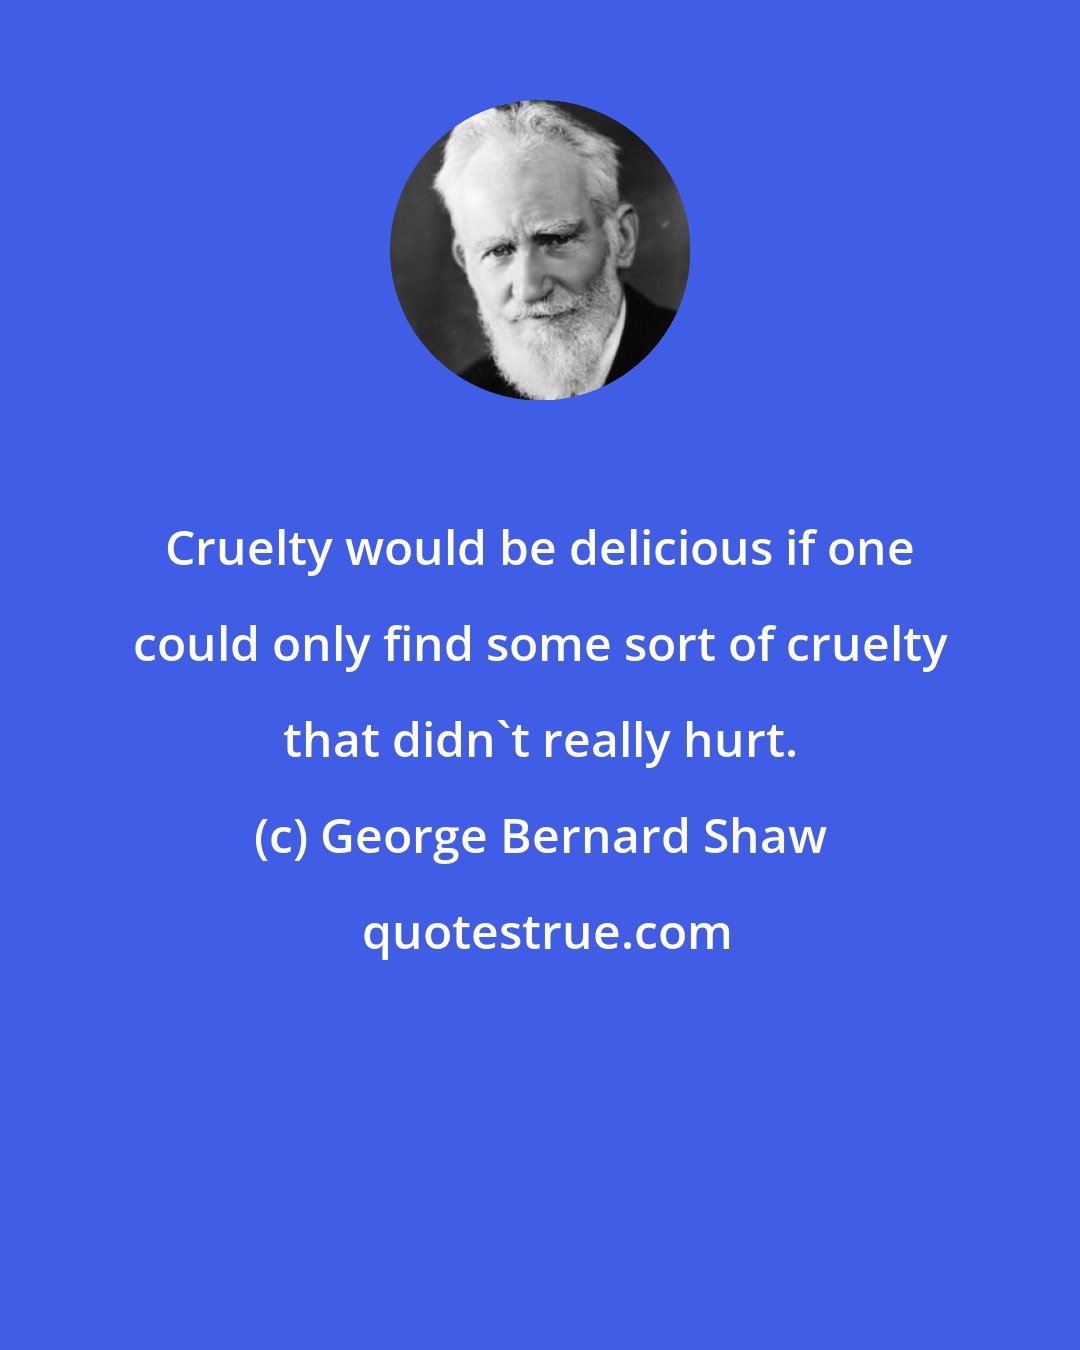 George Bernard Shaw: Cruelty would be delicious if one could only find some sort of cruelty that didn't really hurt.